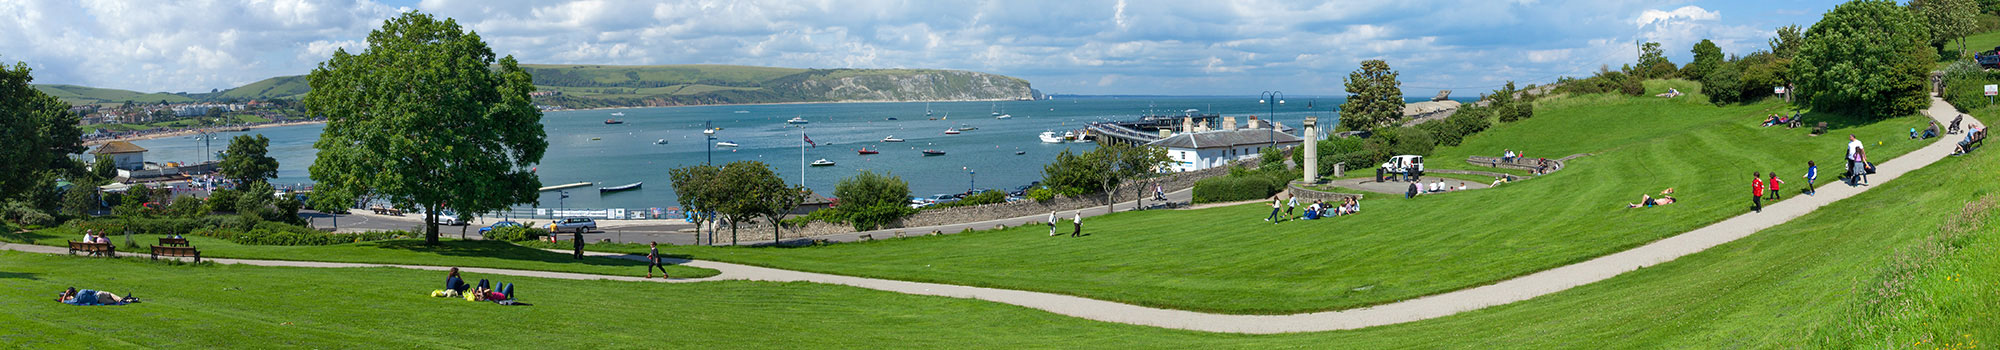 About Virtual Swanage